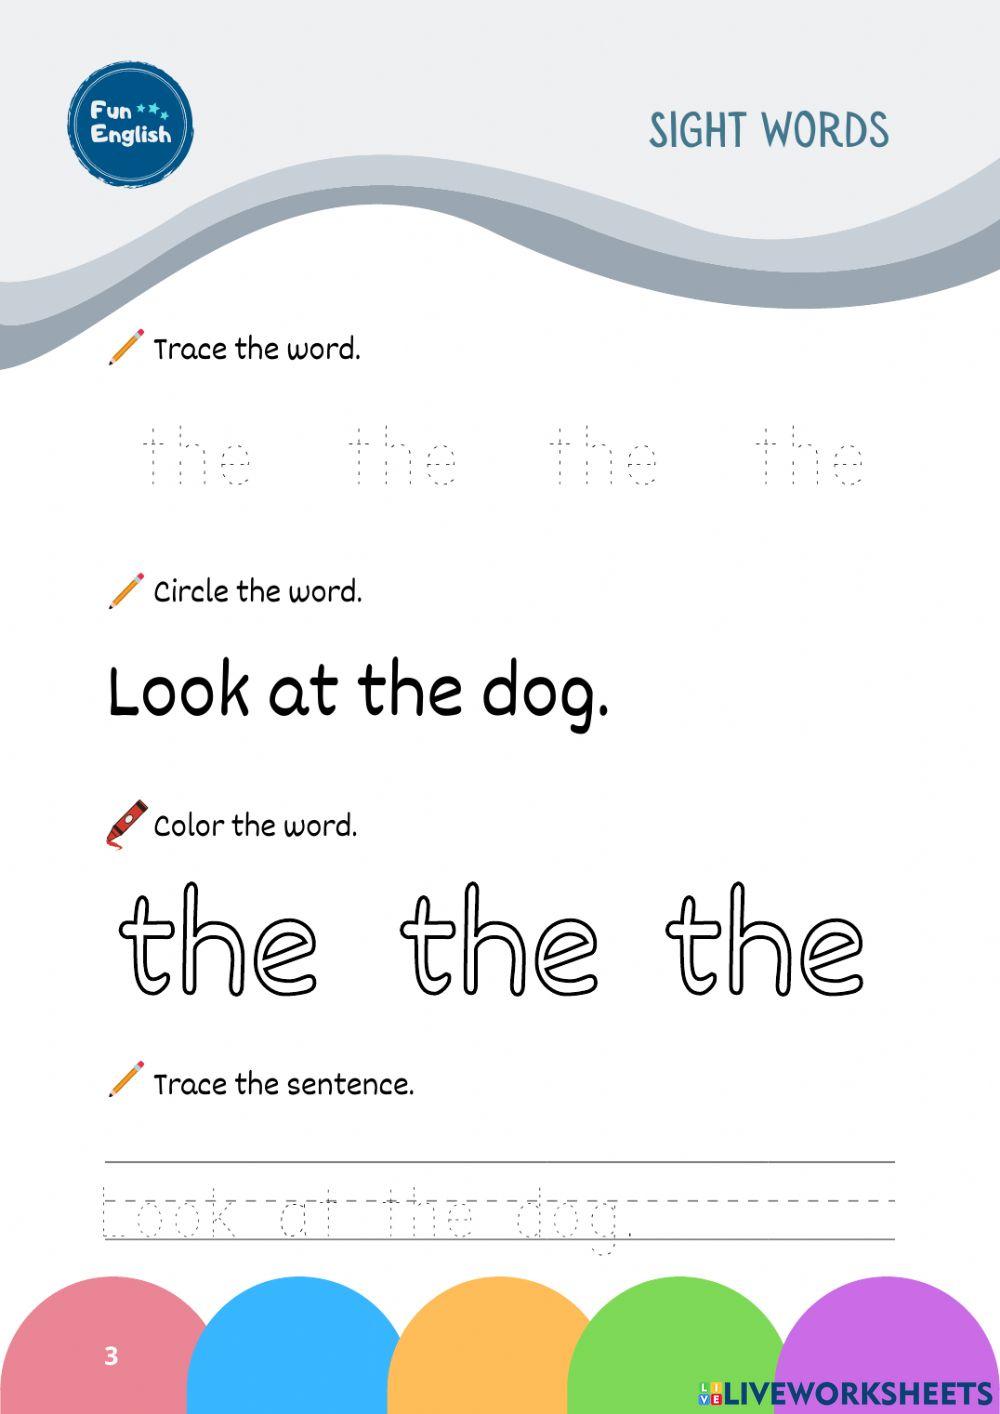 Sight Words: The